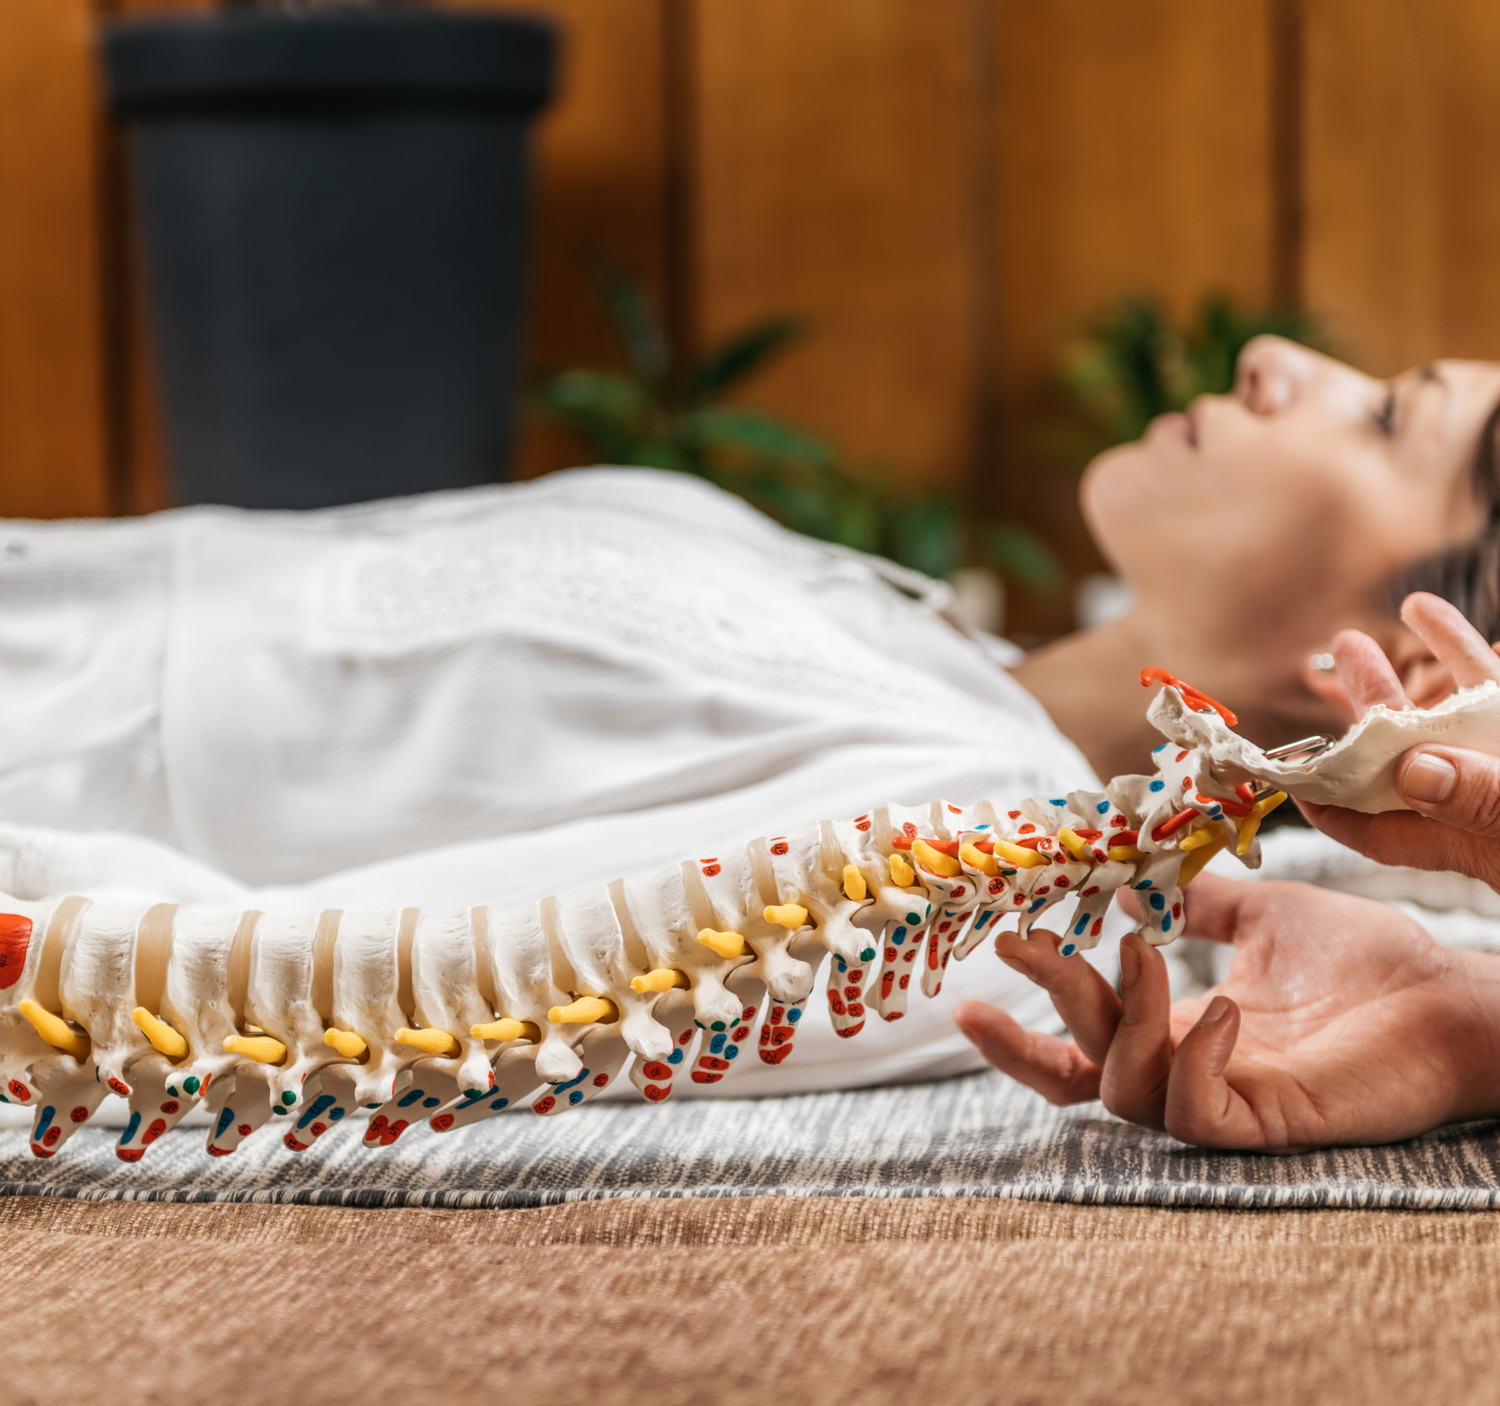 Flexible Spine Model for Chiropractic and Osteopathy Patient Education